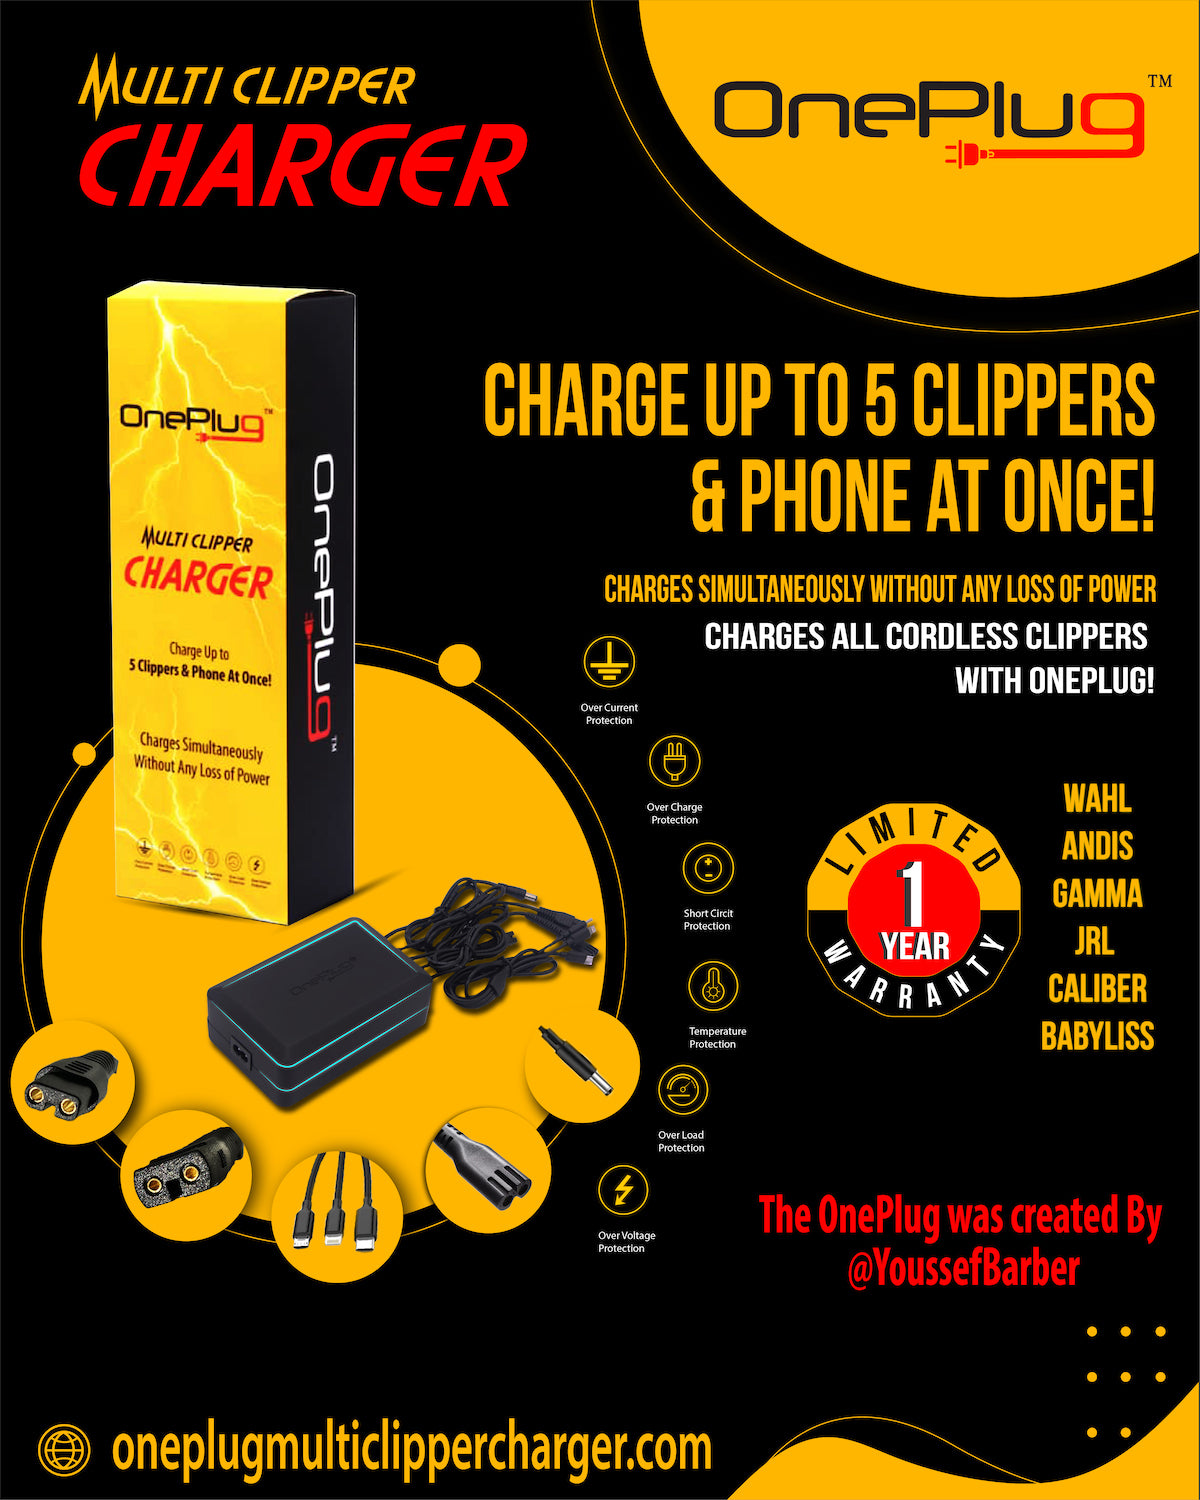 OnePlug MultiClipper Charger